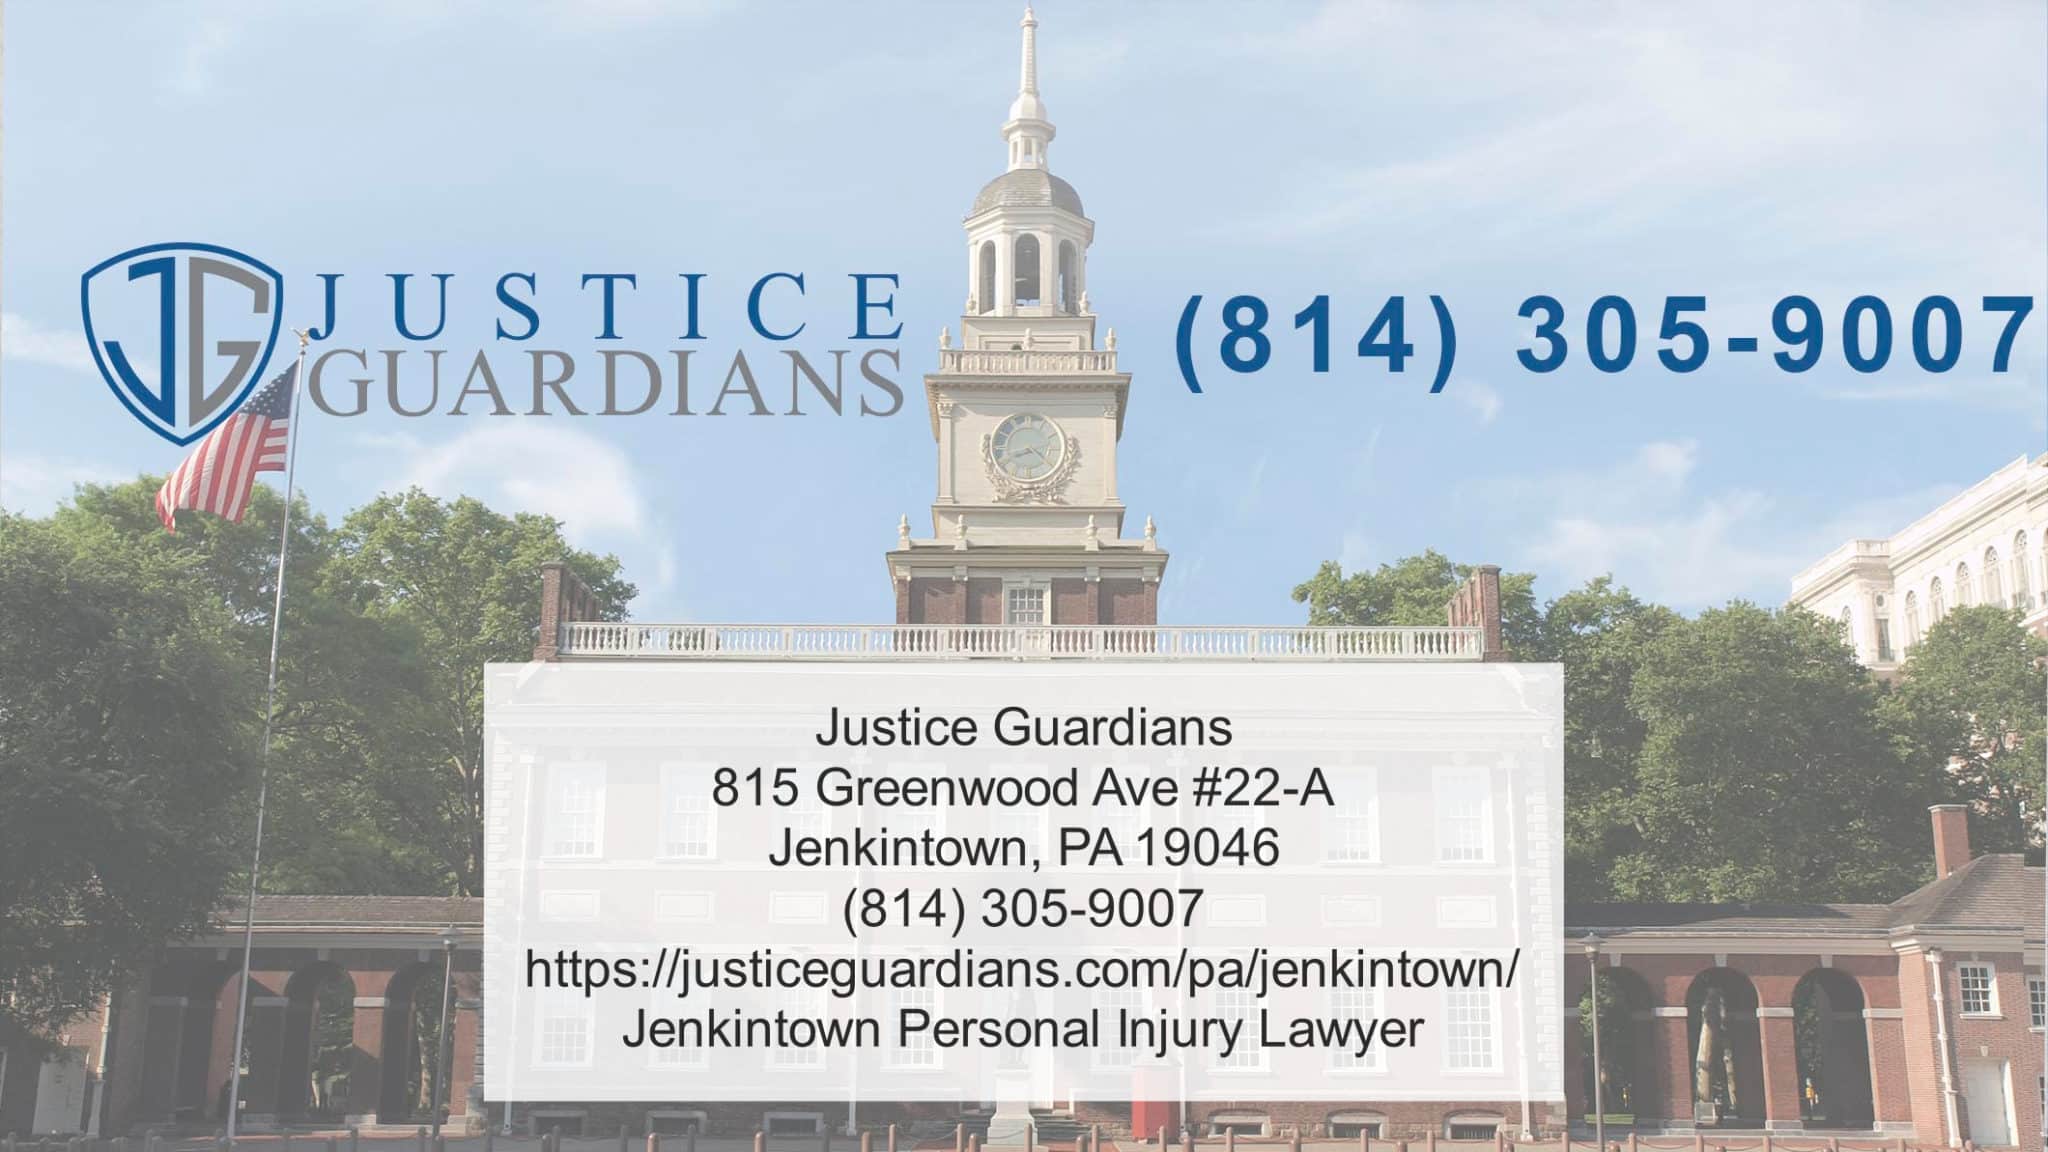 Jenkintown Medical Negligence Attorneys Represent Children With Cerebral Palsy